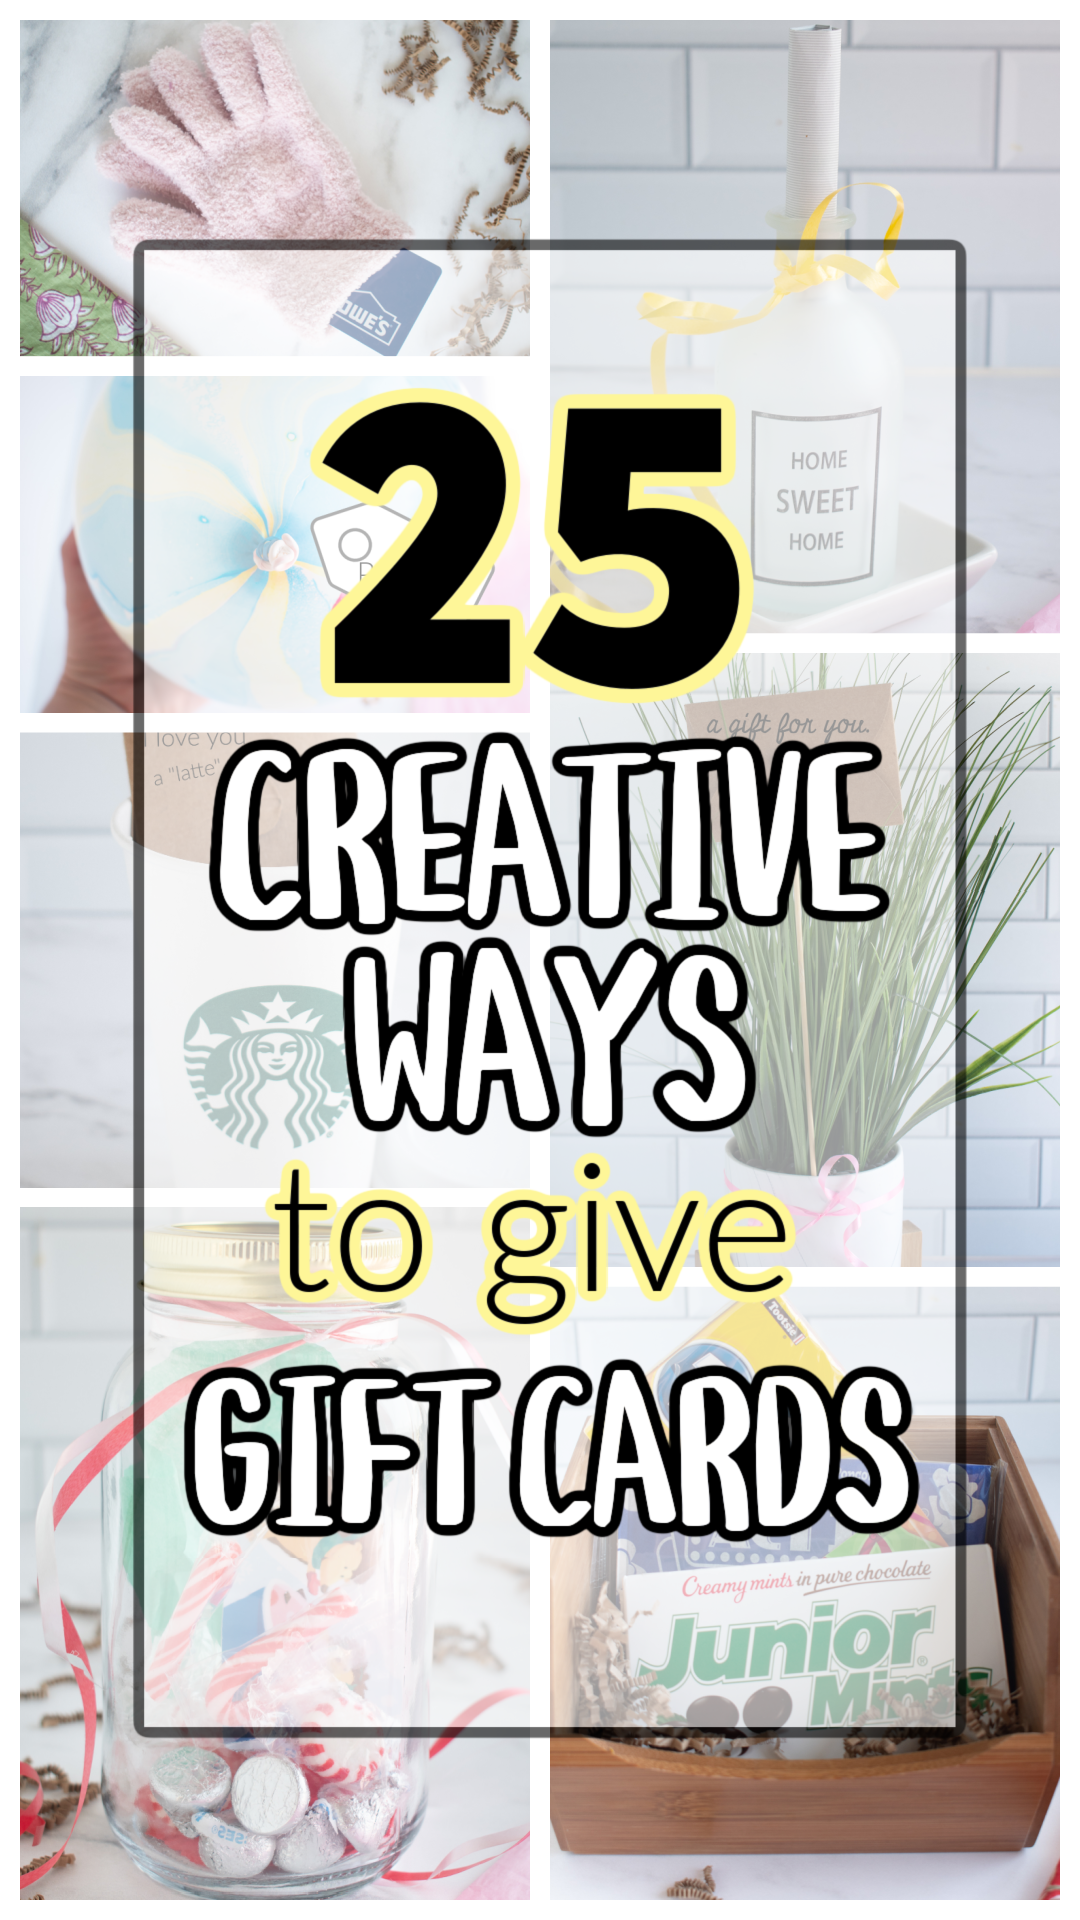 List of the Best Holiday Gift Cards for Teens